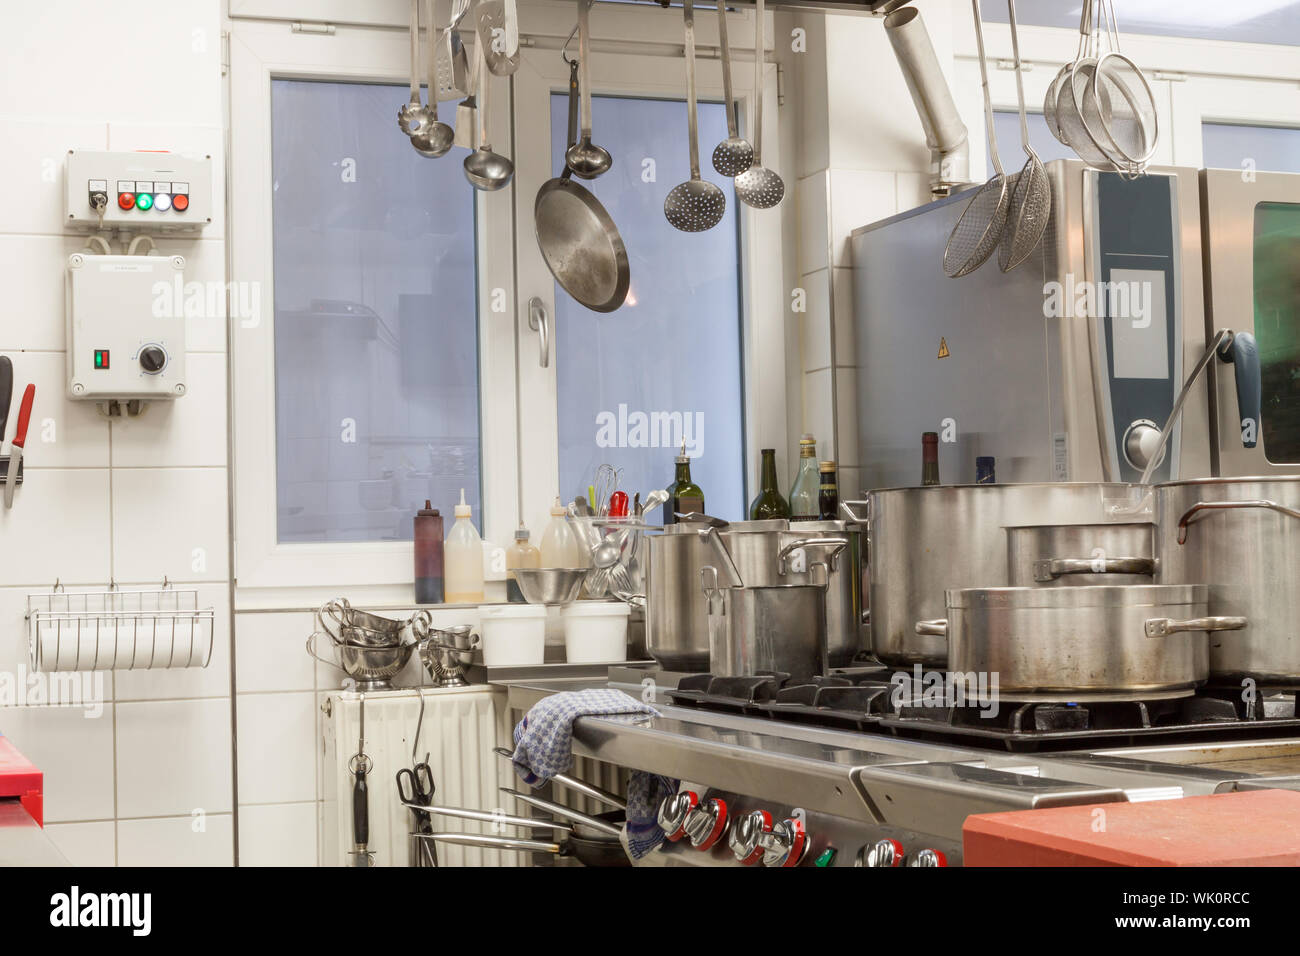 Neat interior of a commercial kitchen Stock Photo